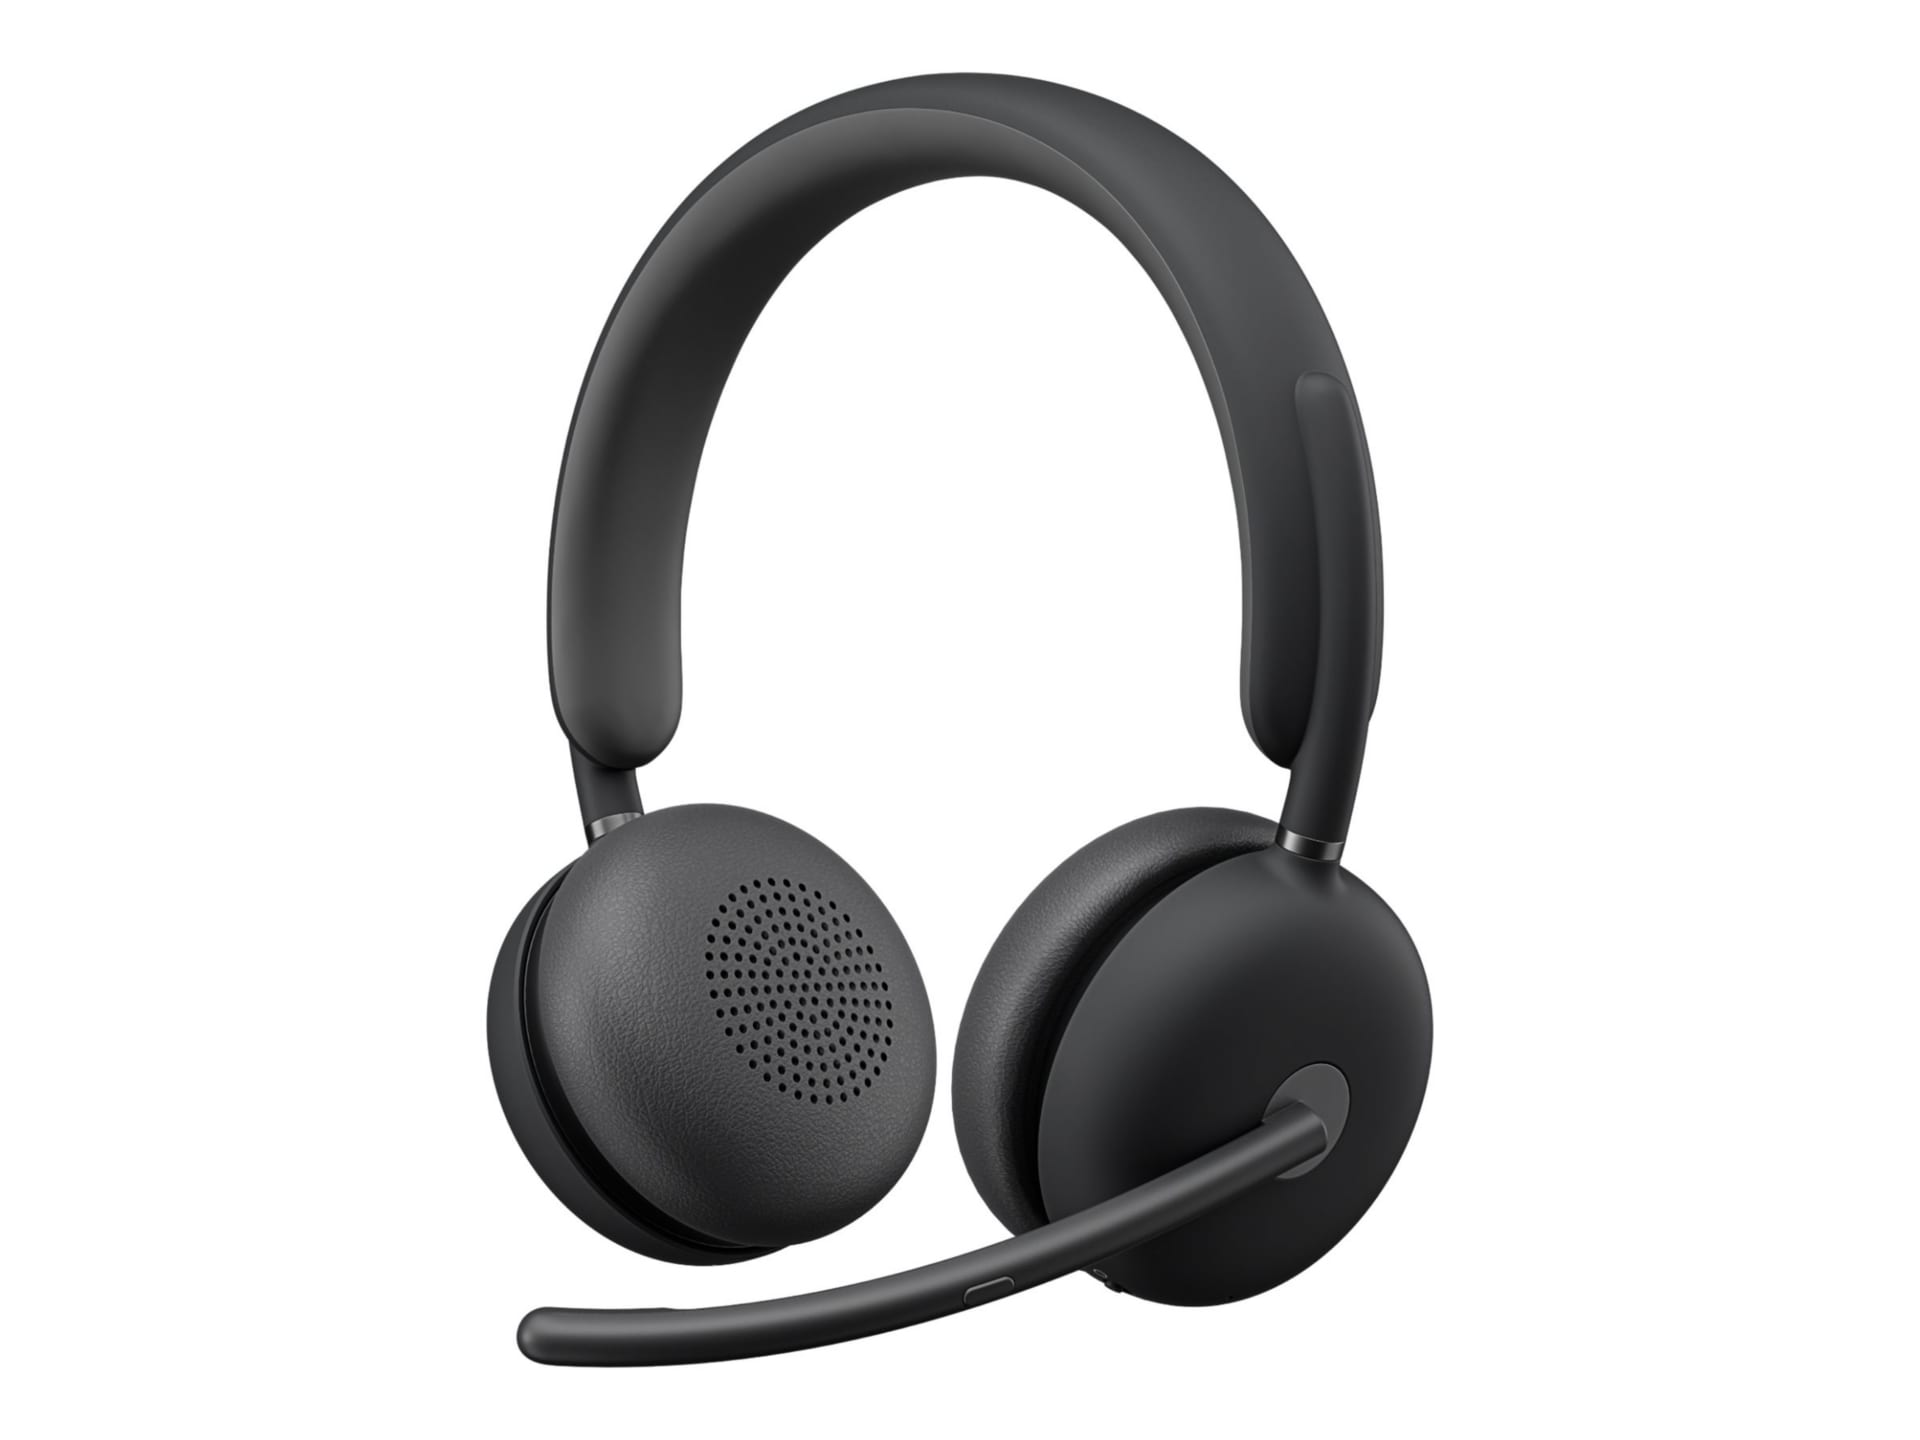 Logitech Zone 950 Premium Noise Canceling Headset with Hybrid ANC, Certified for Zoom, Google Meet, Google Voice, Fast